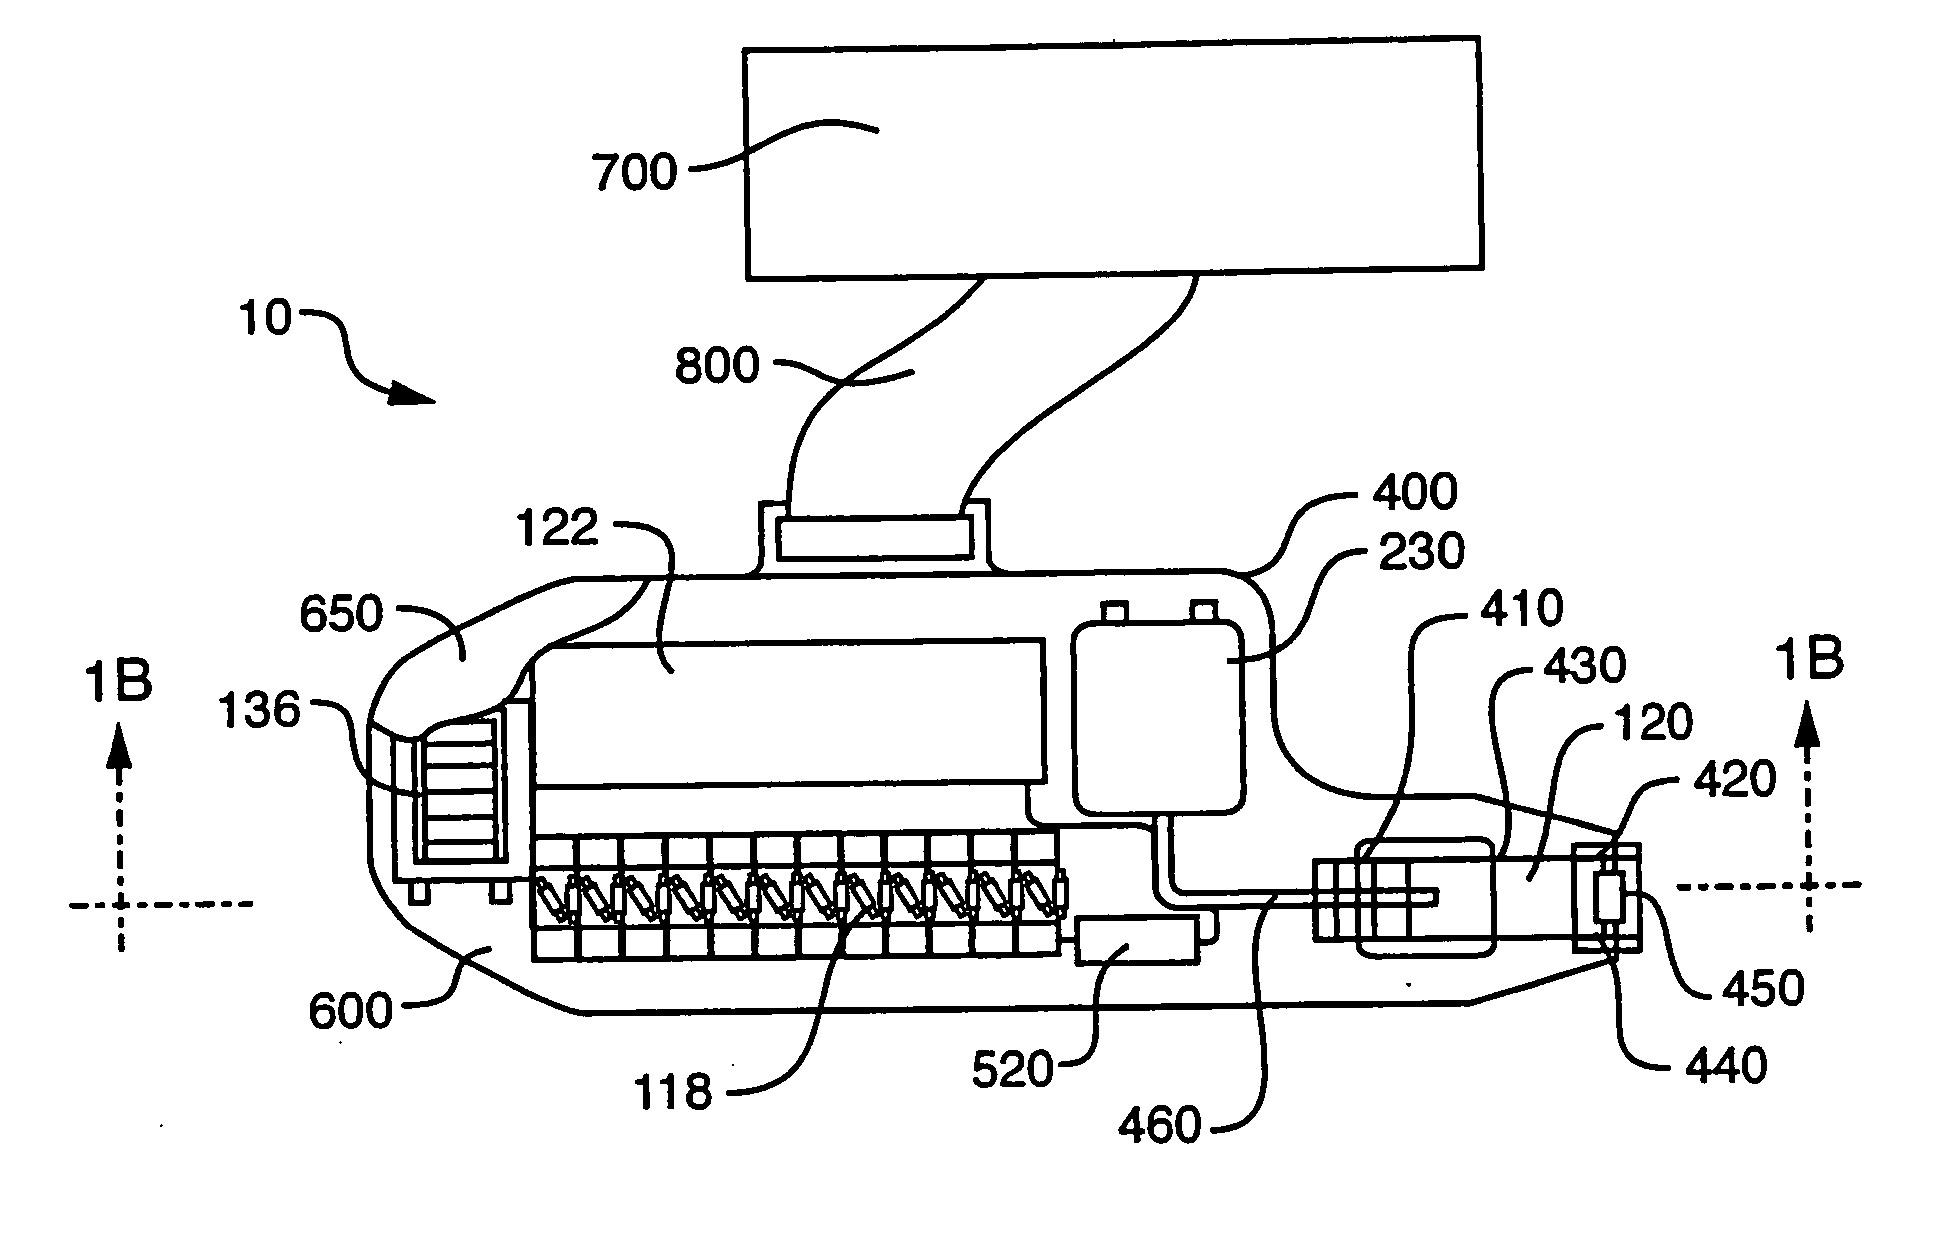 Integrated X-ray source module